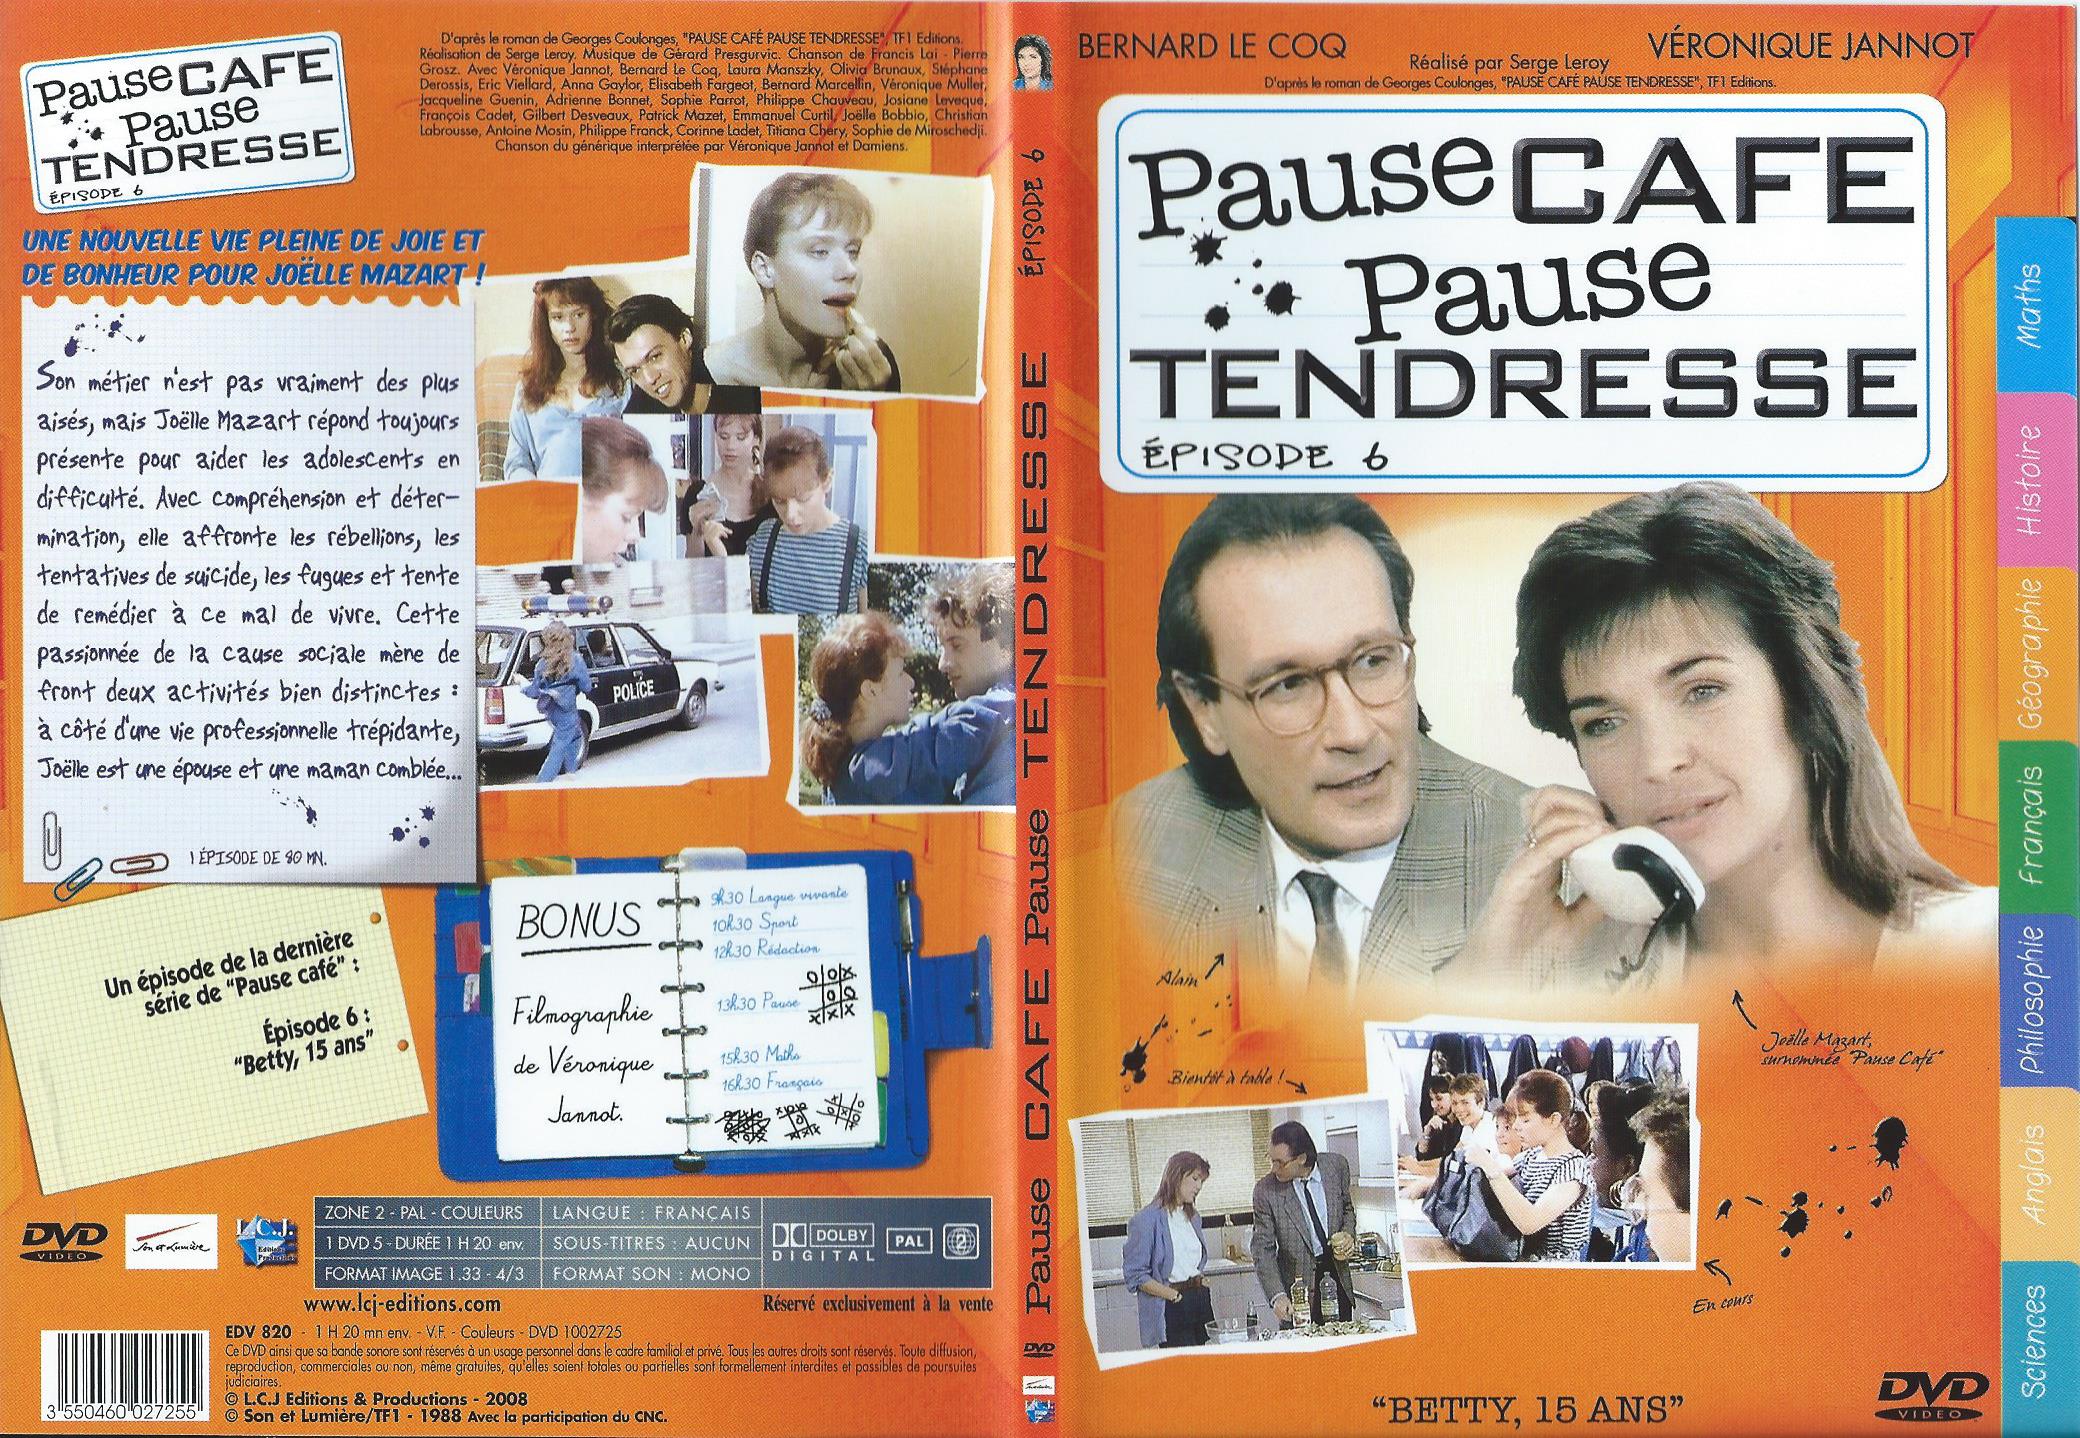 Jaquette DVD Pause Caf, Pause Tendresse DVD 6